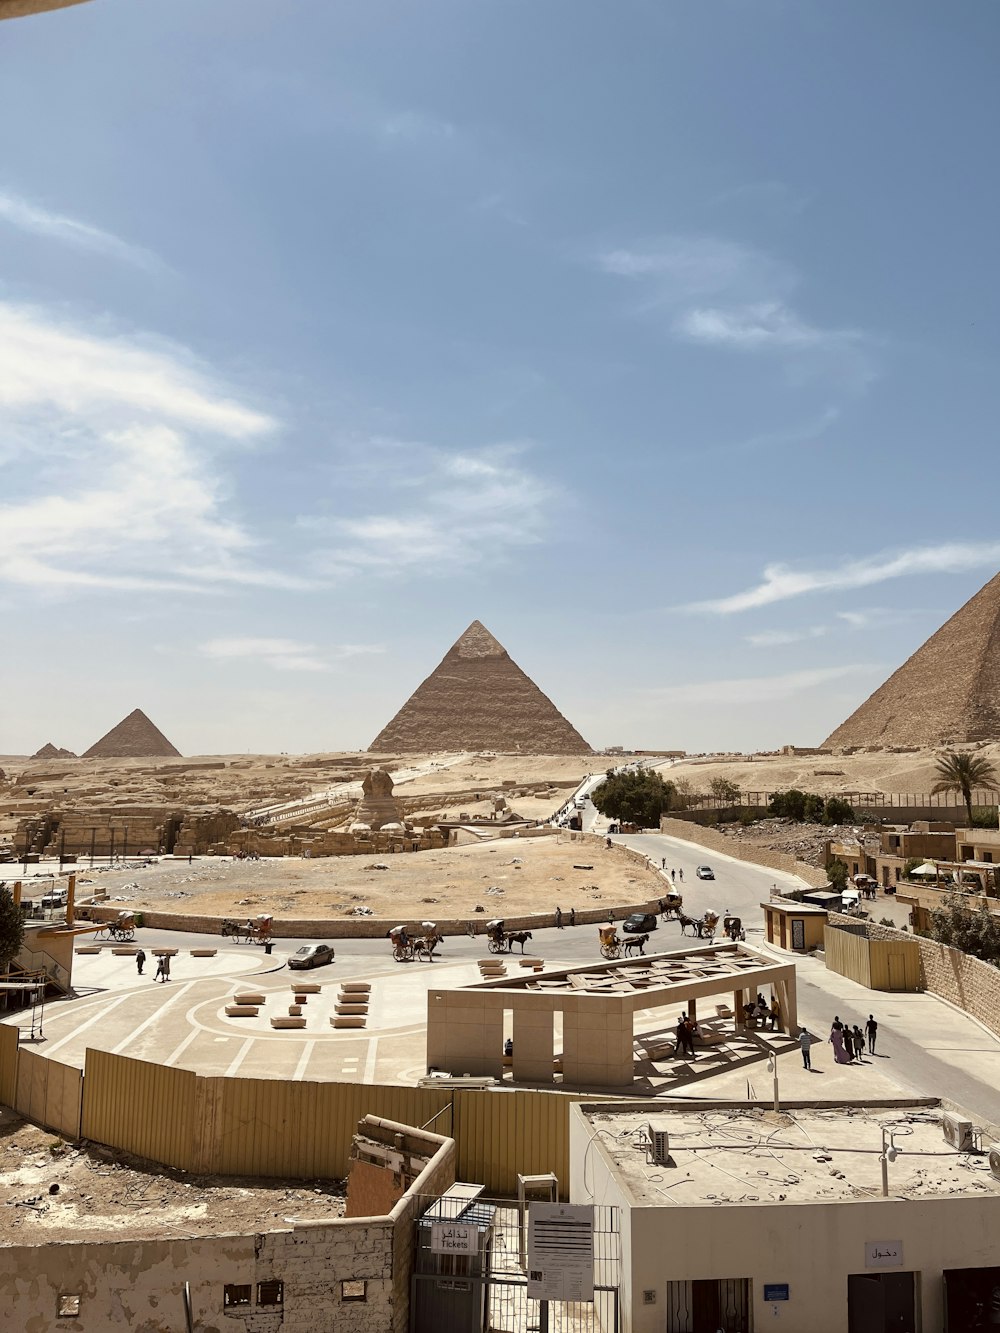 the pyramids of giza are in the distance